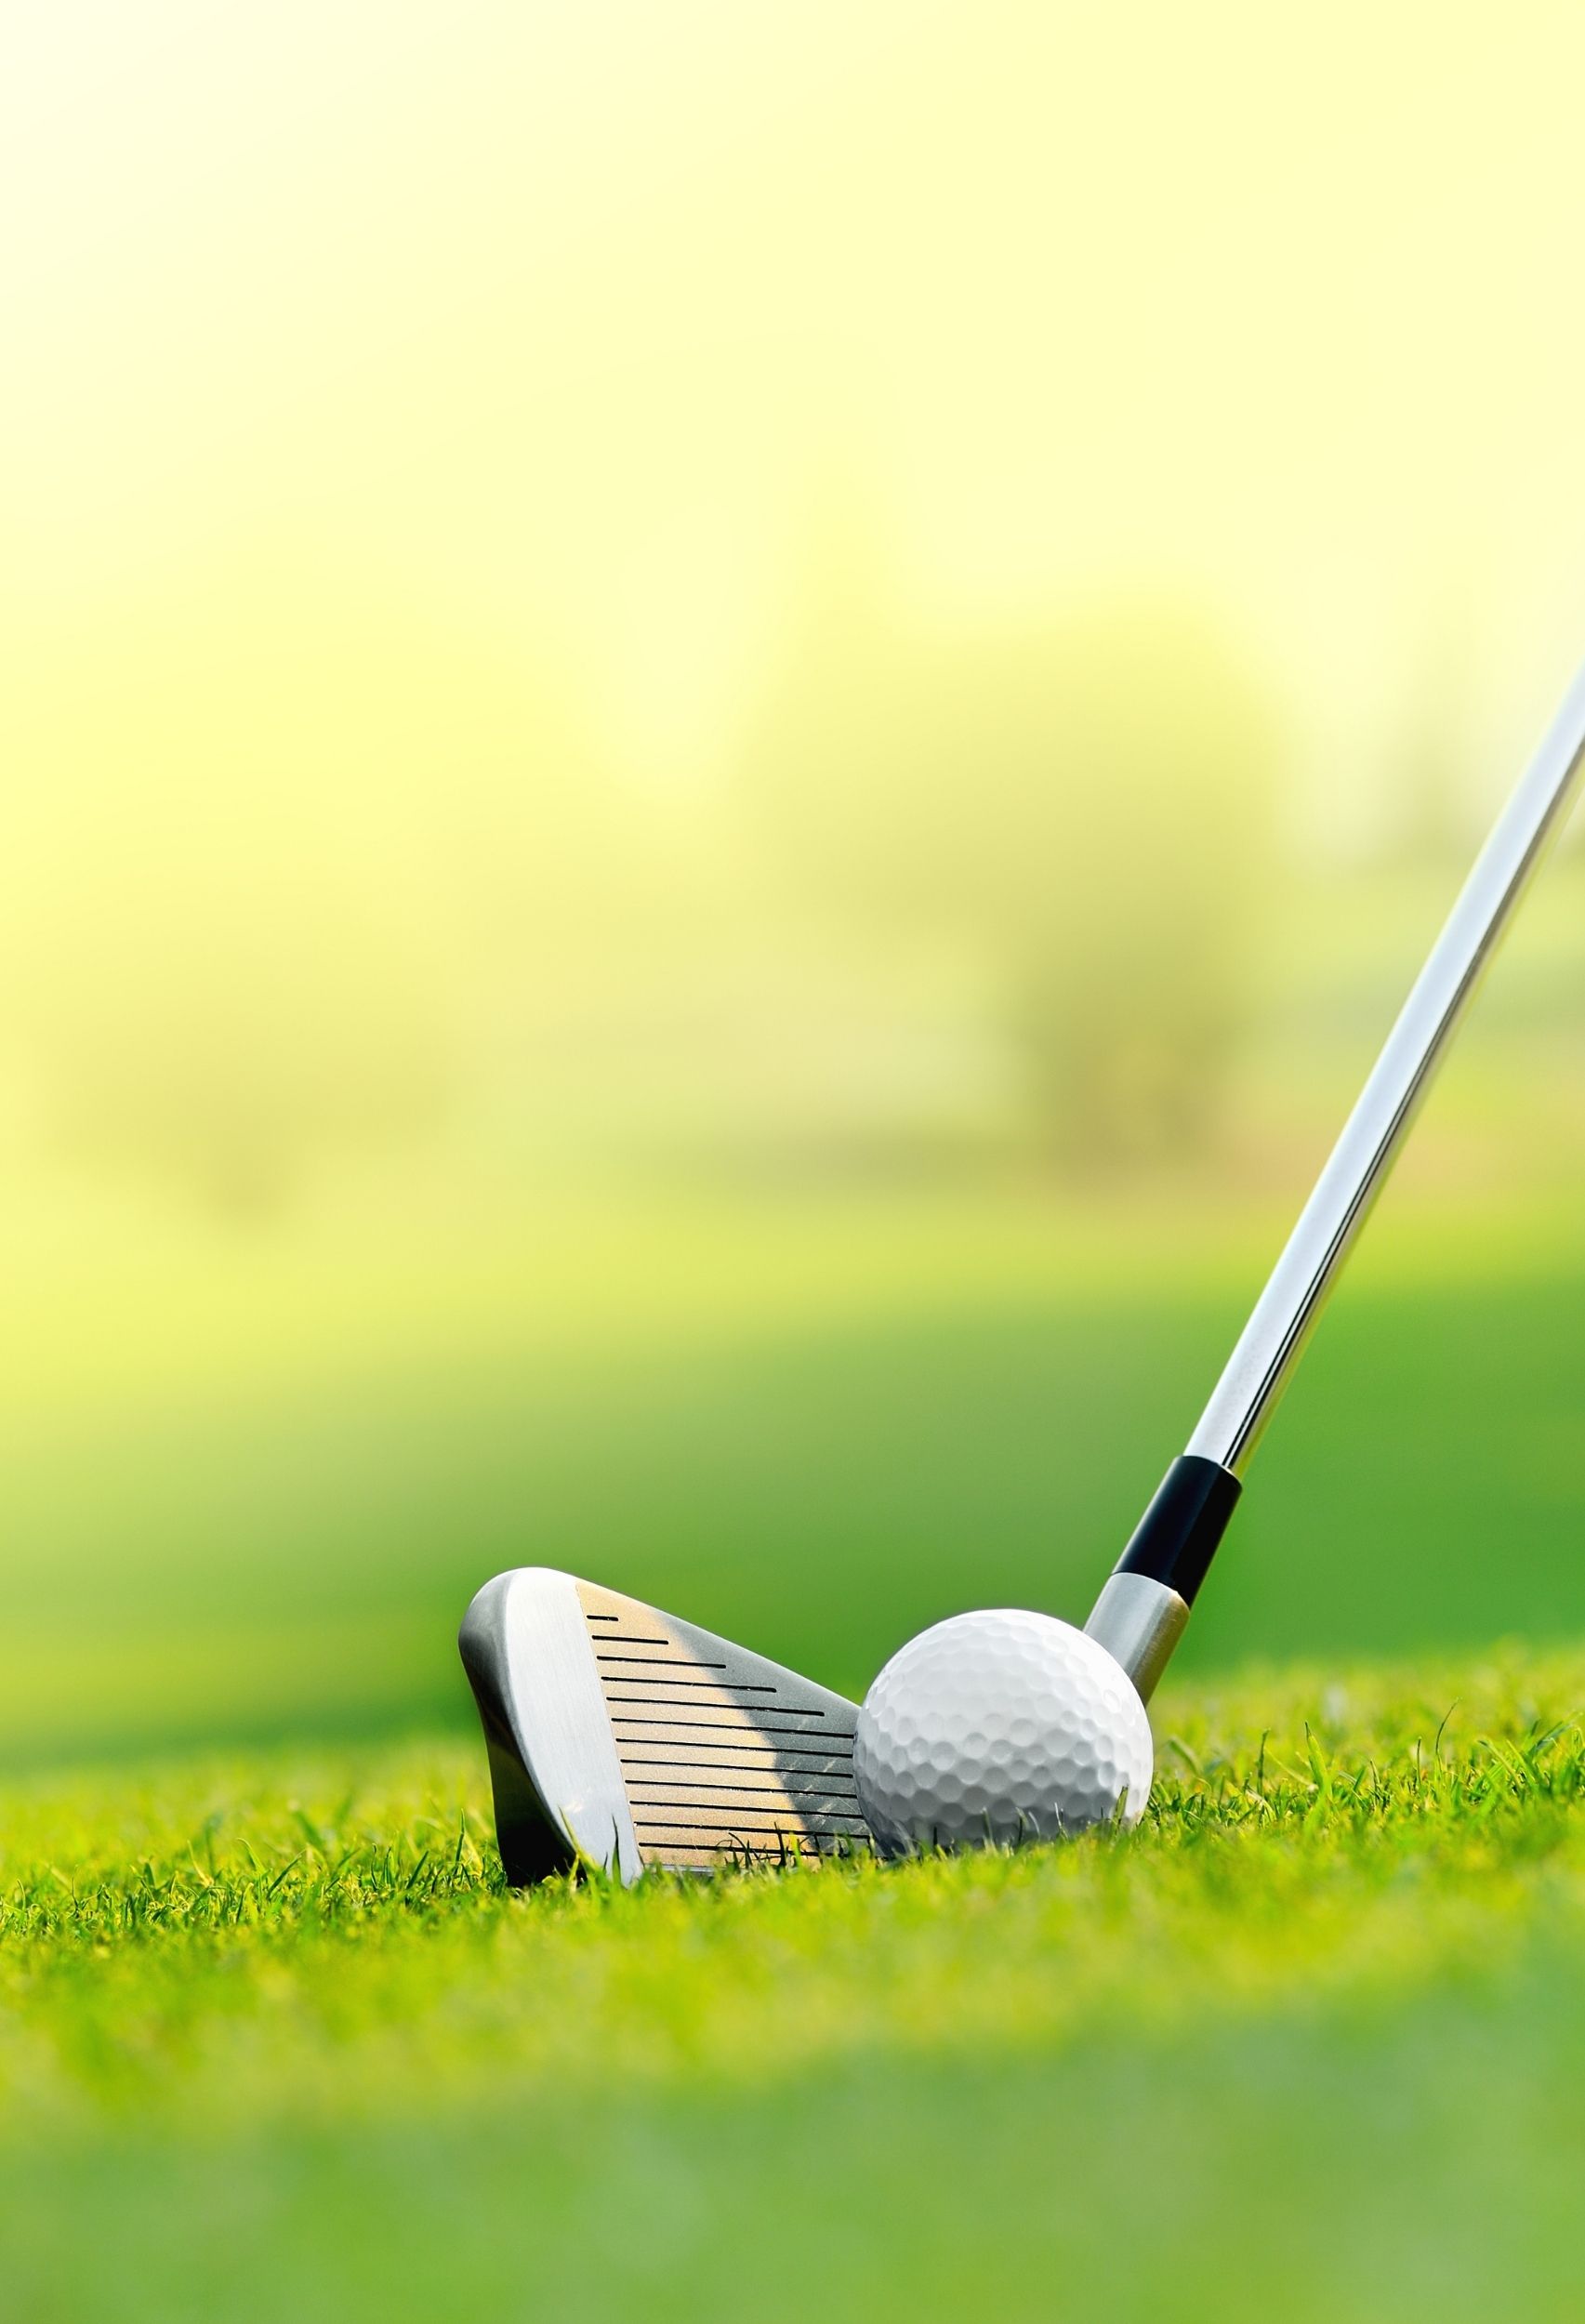 Perfecting Your Swing As A New Golfer - Rita Reviews